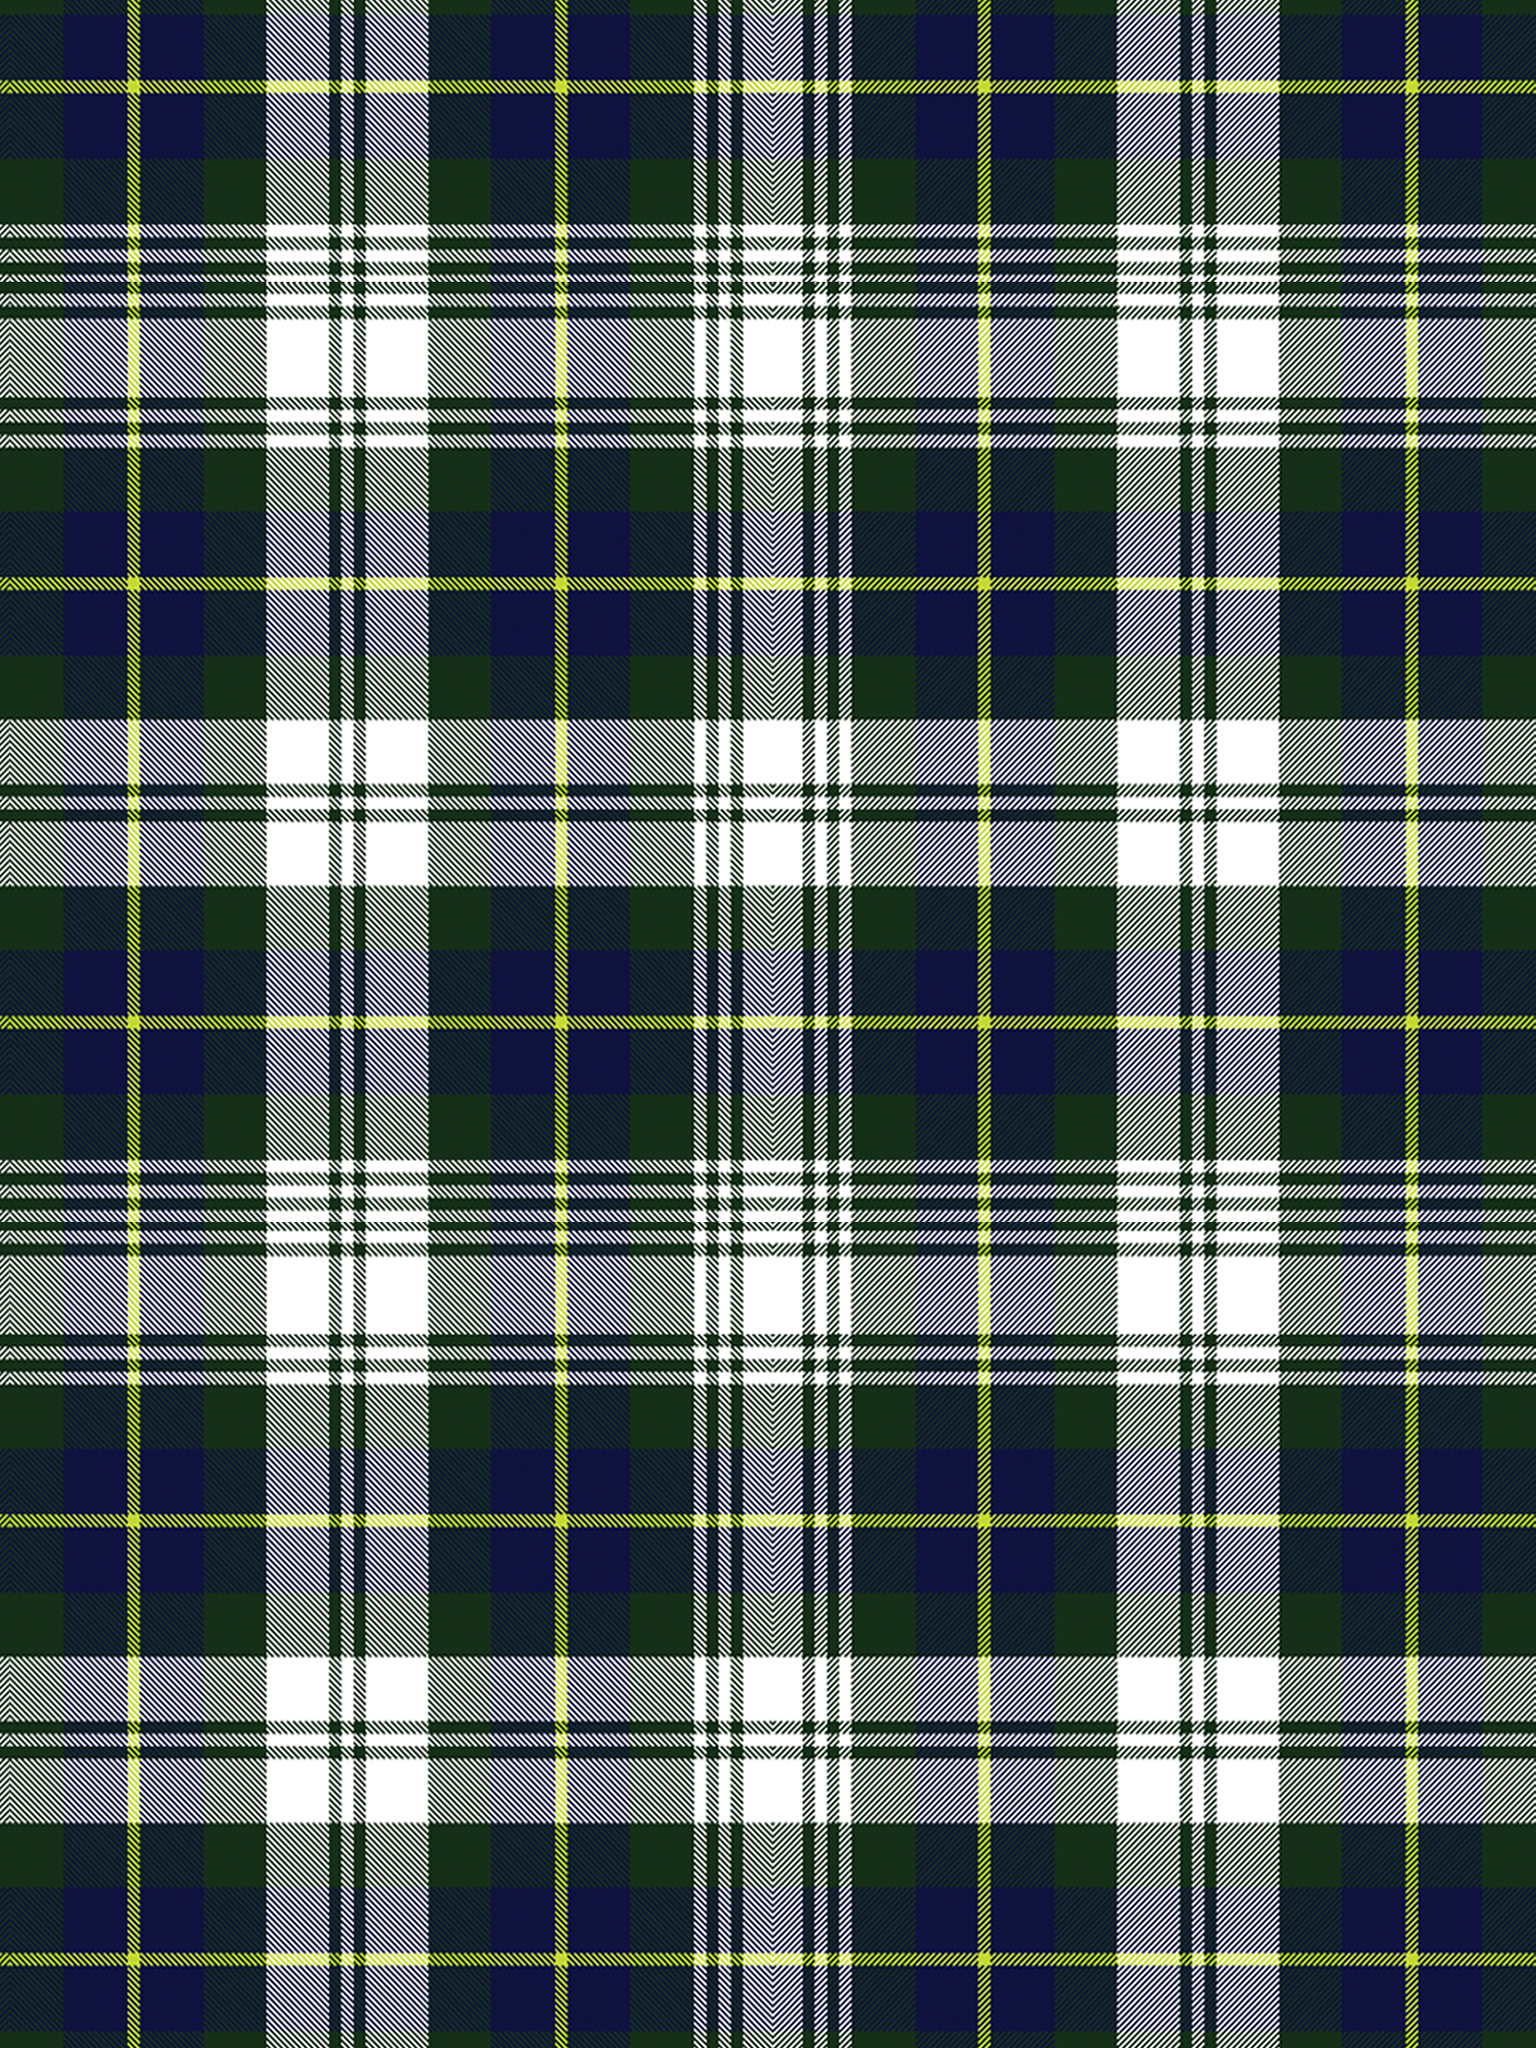 Free AW15 Tartan Wallpaper for iPhone and Tablet | IJP Design